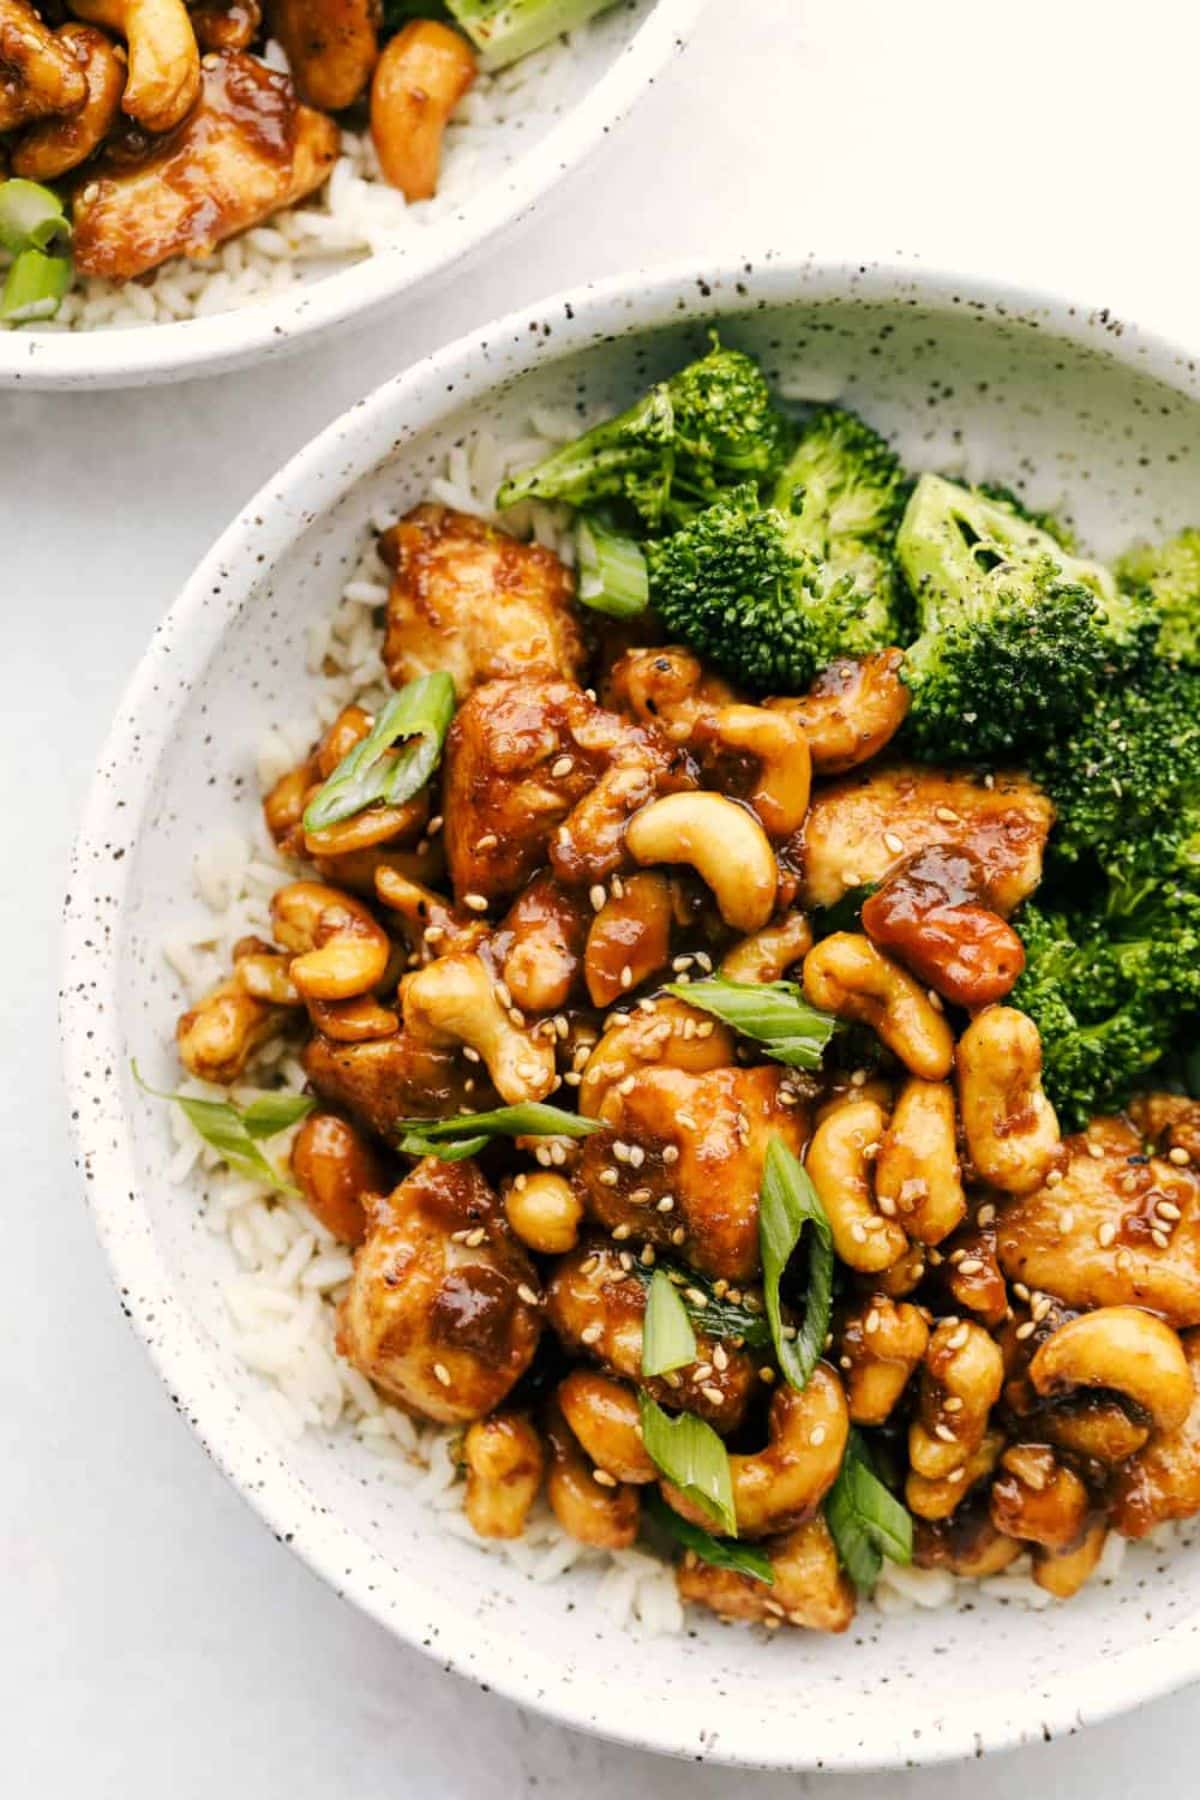 Delicious Cashew Chicken with broccoli in a bowl.